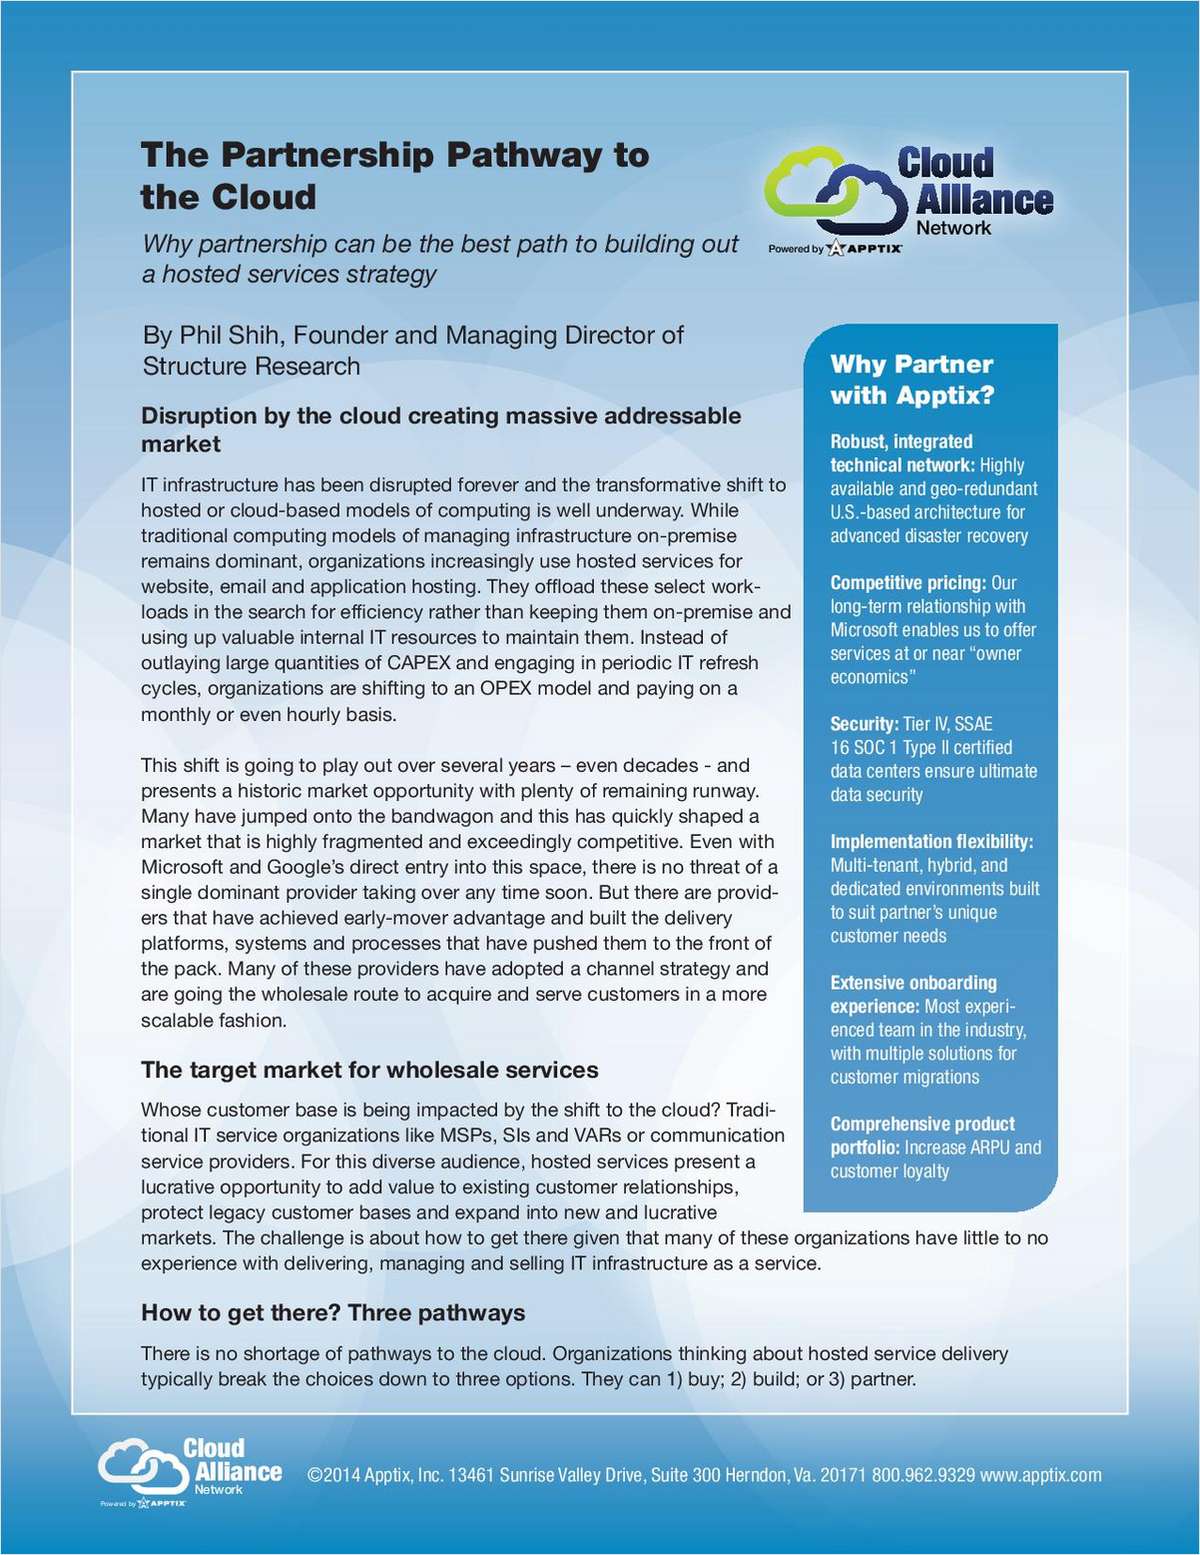 The Partnership Pathway to the Cloud